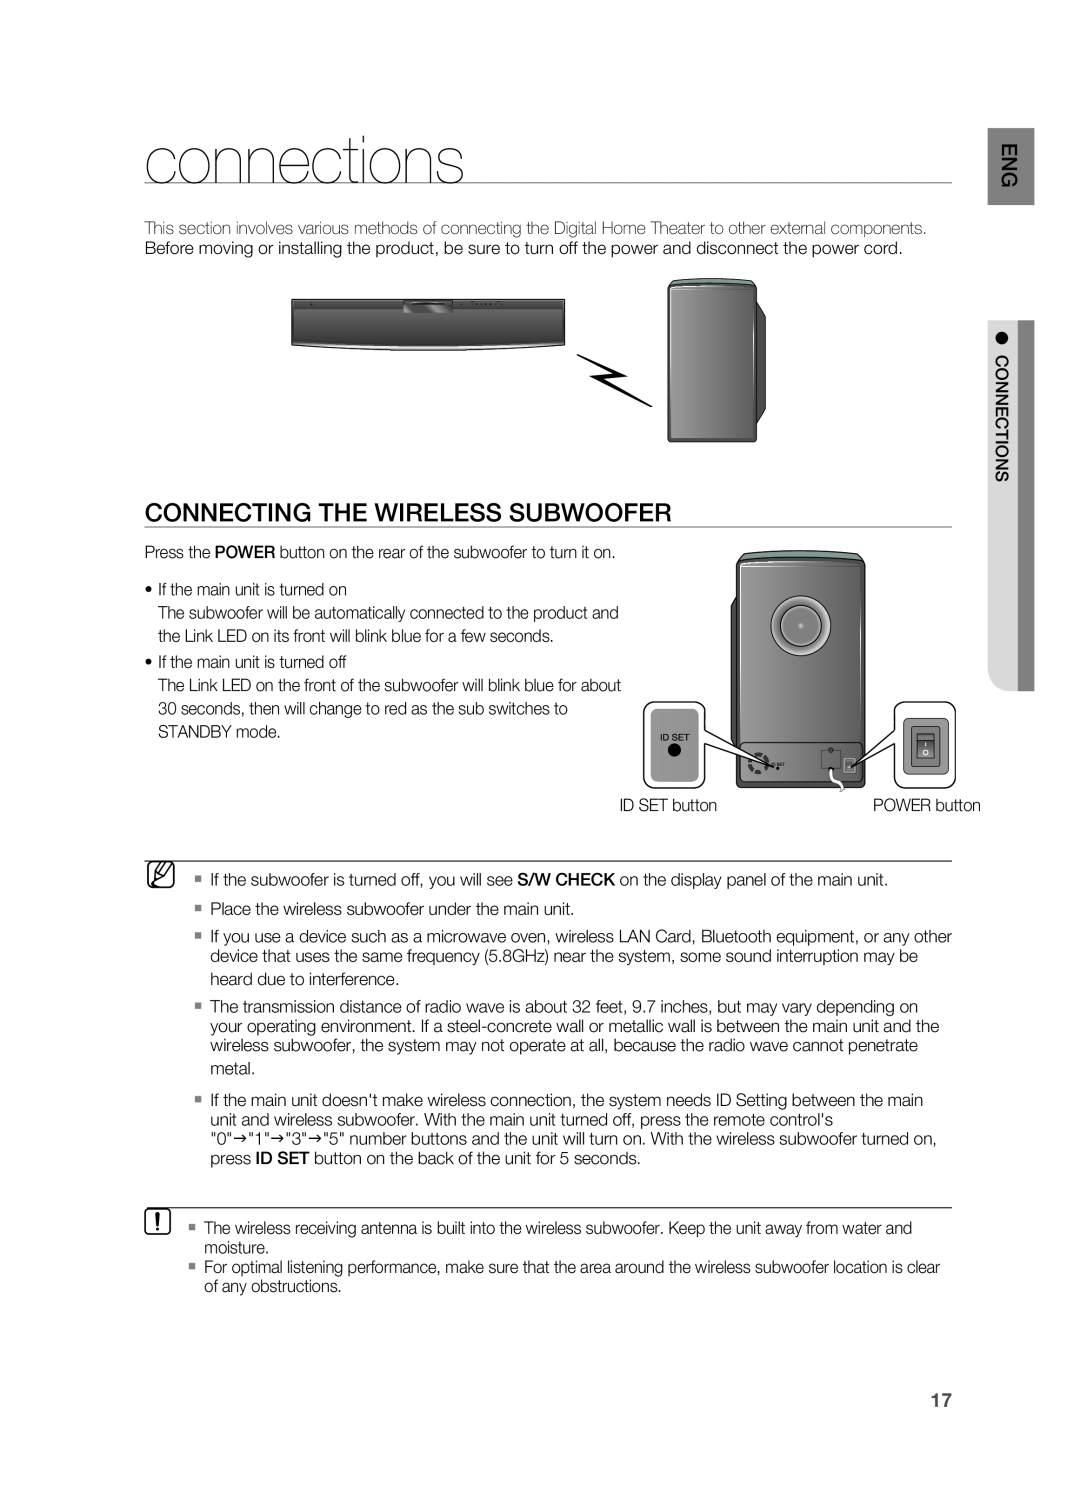 Sony HT-X810 user manual connections, CONNECTING THE WIrElESS SUBWOOFEr 